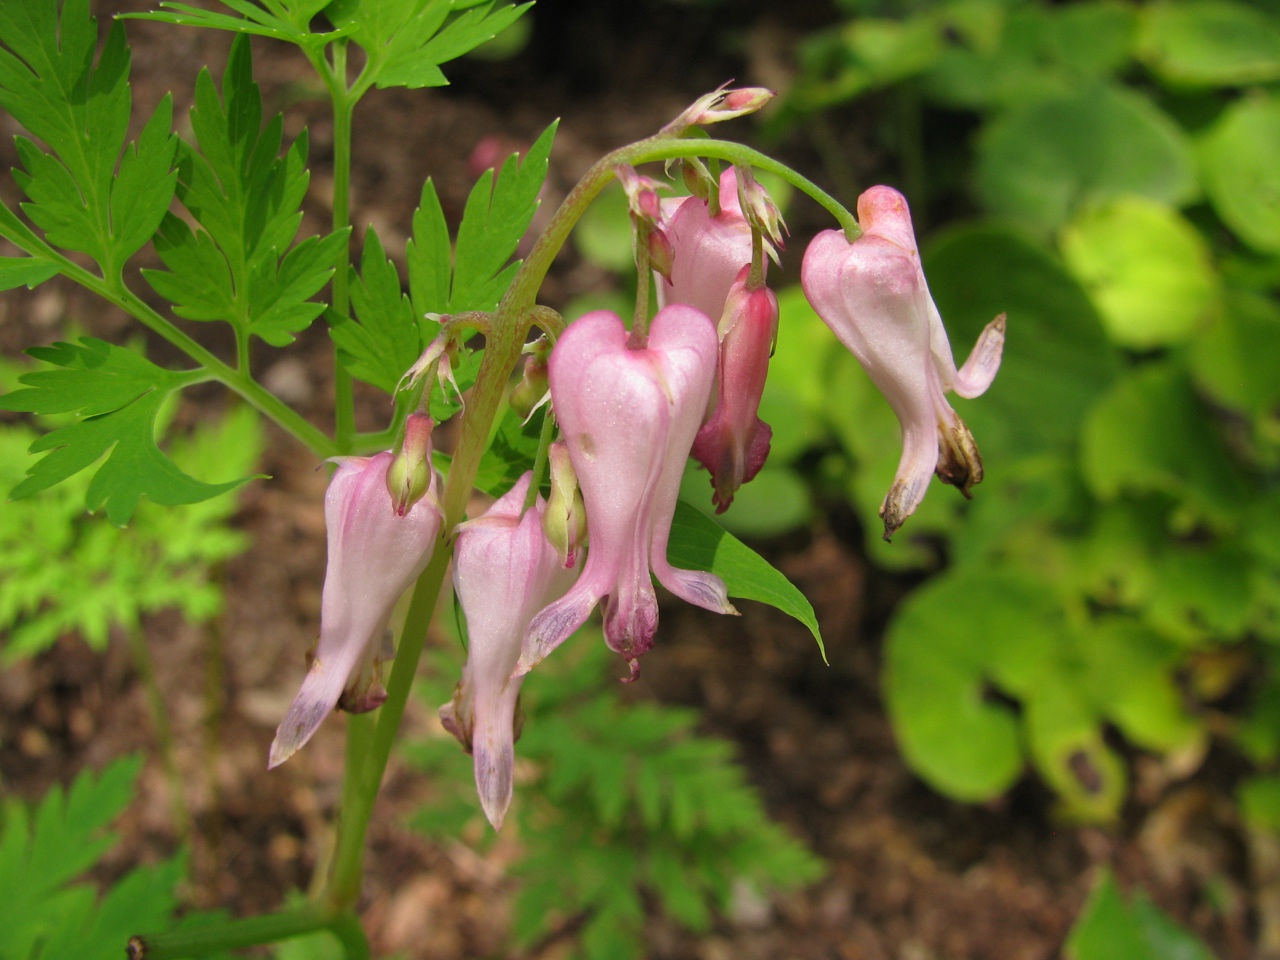 The Scientific Name is Dicentra eximia. You will likely hear them called Wild Bleeding Heart, Fringed Bleeding Heart. This picture shows the Close-up of flowers of Dicentra eximia